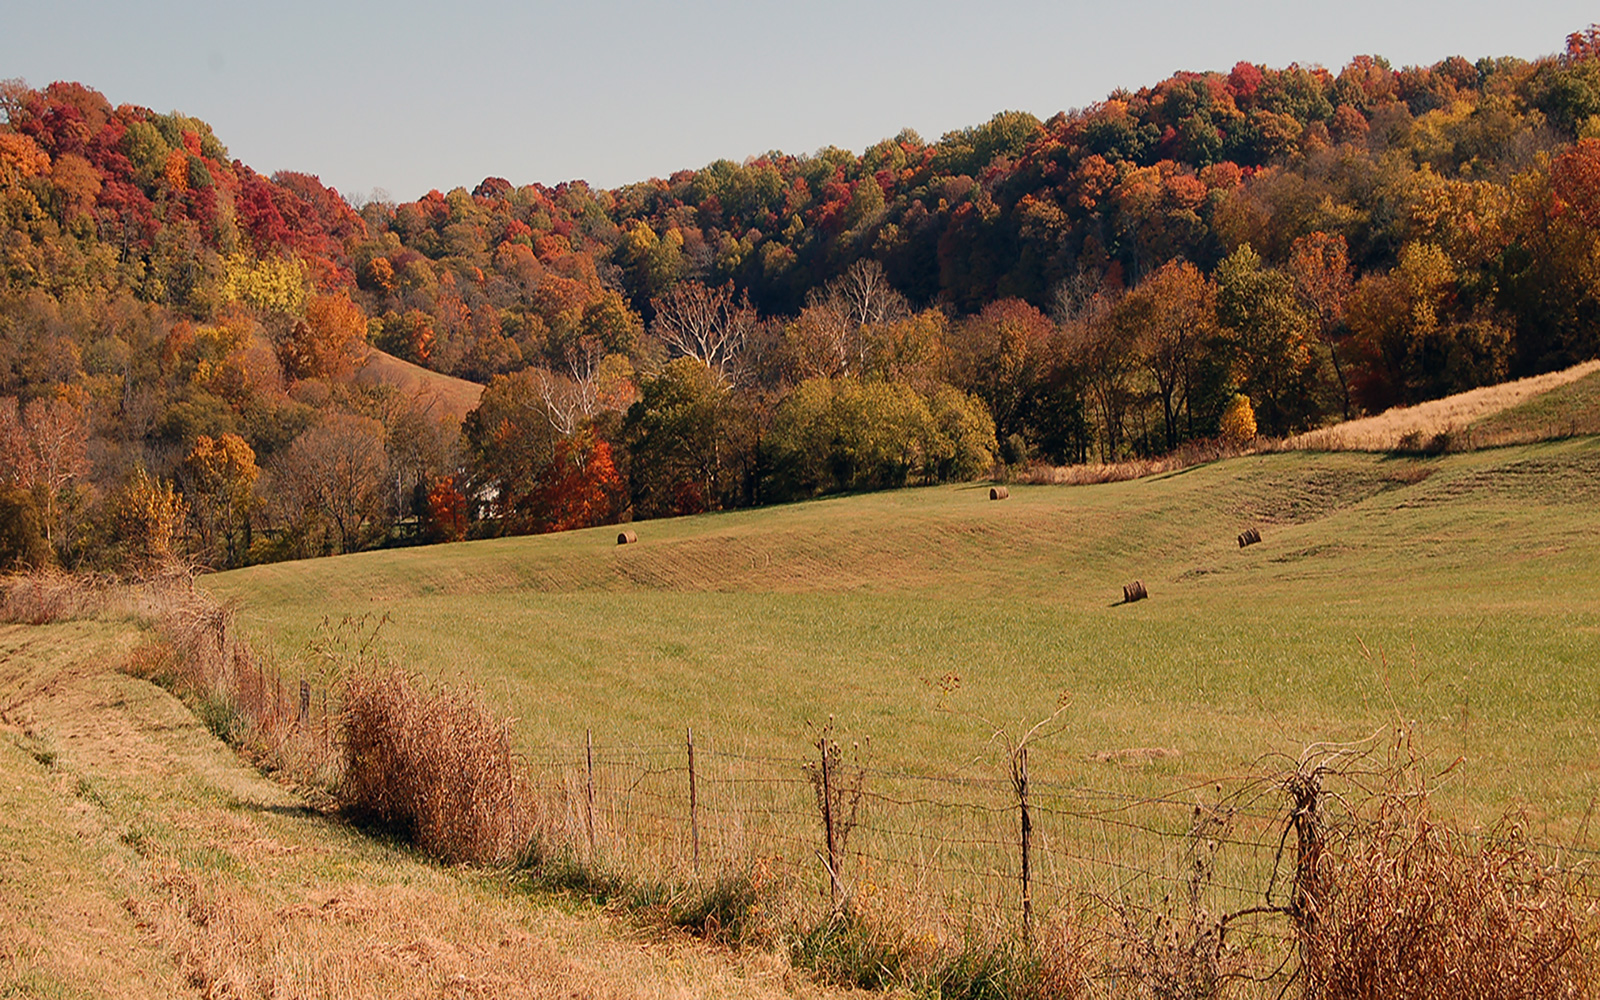 An open pasture with fall foliage.